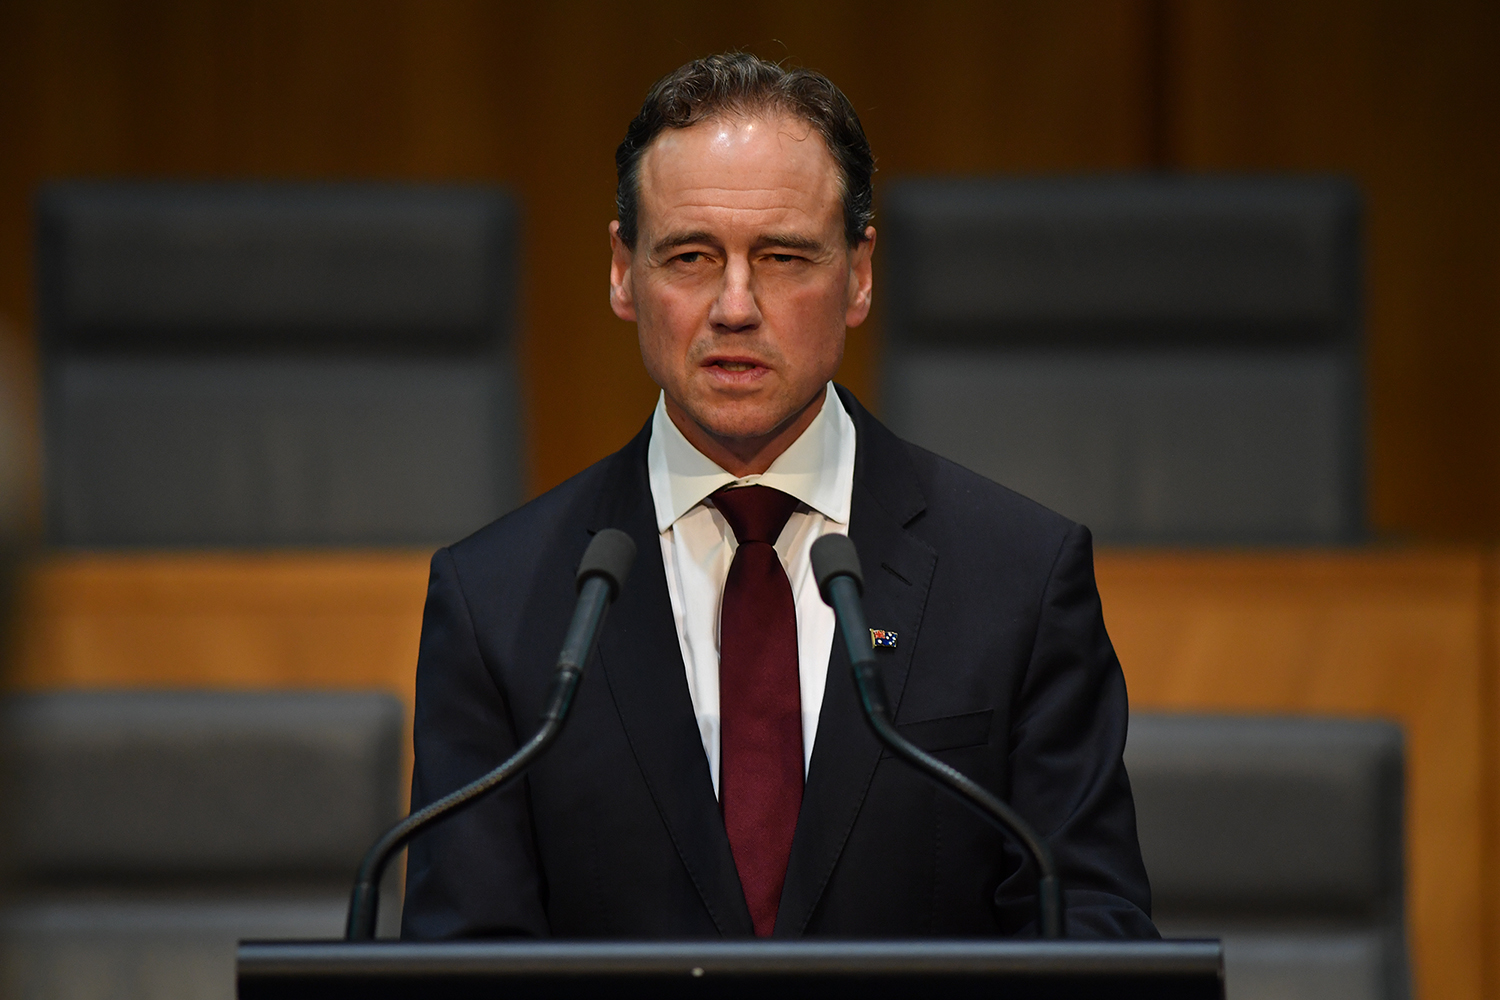 Minister for Health Greg Hunt during a press conference at Parliament House on March 24, 2020 in Canberra, Australia.